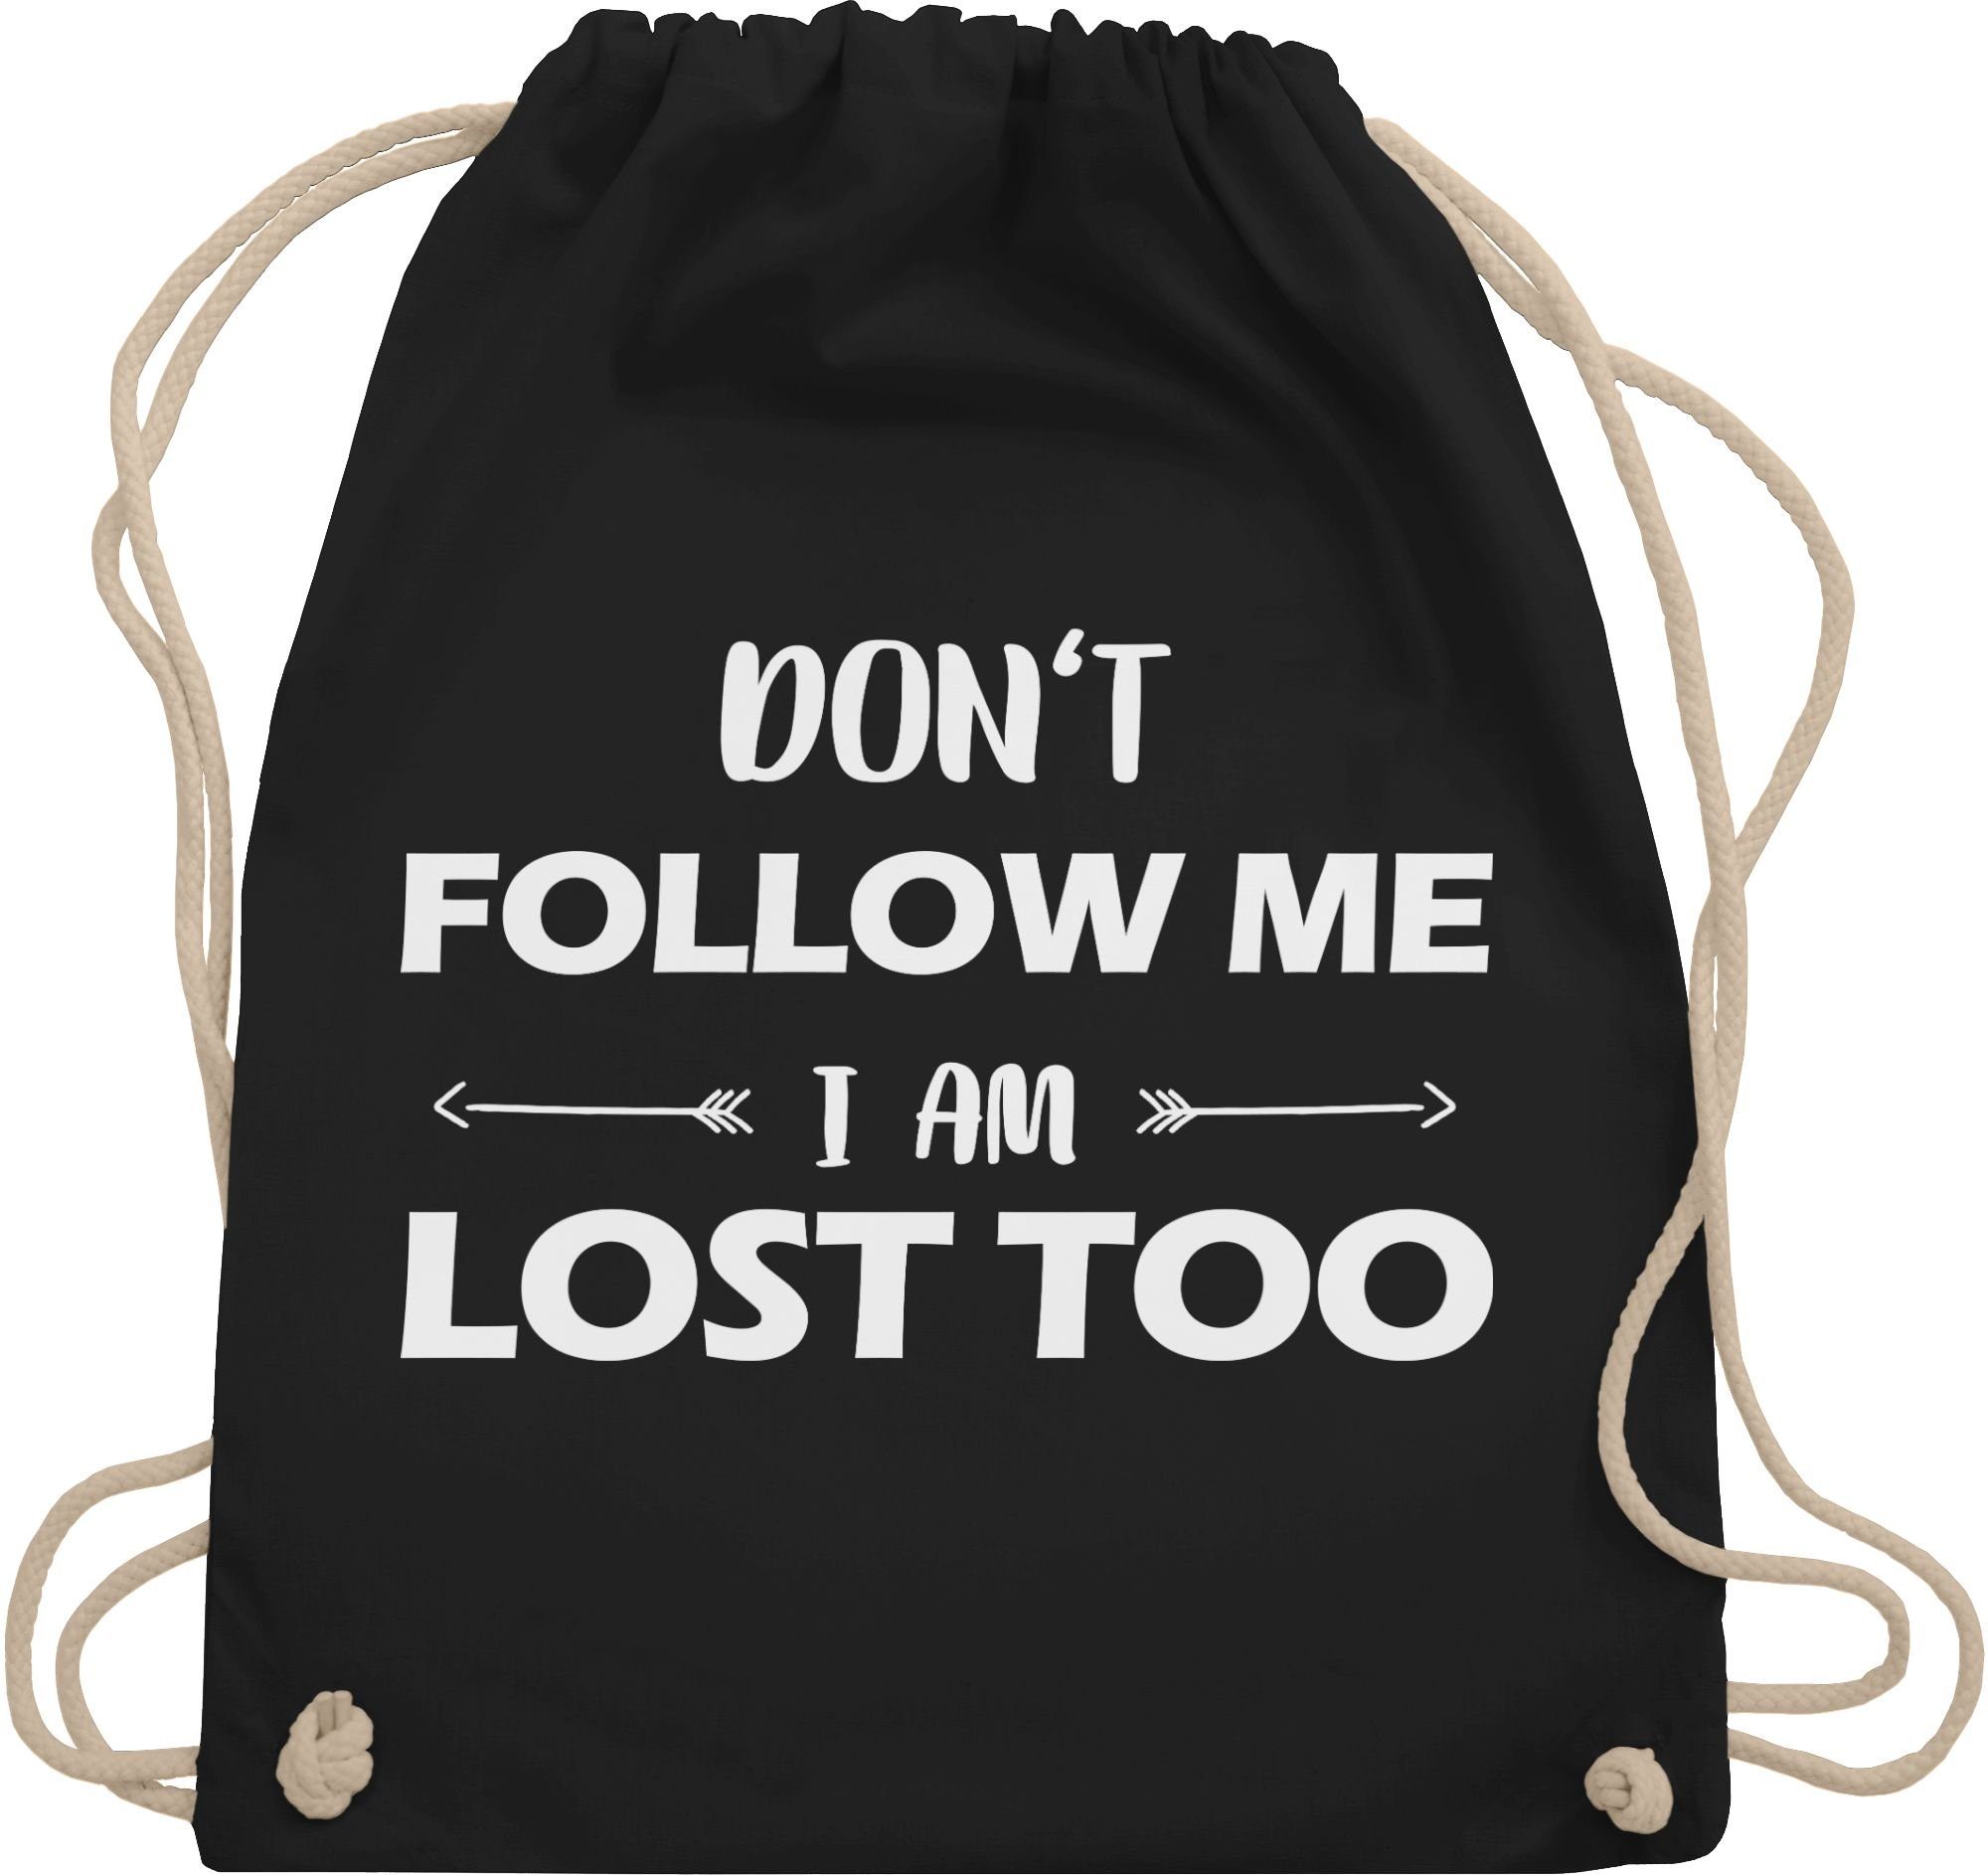 Shirtracer Turnbeutel Don't follow me I am lost too - Pfeile, Stoffbeutel  Festival Outfit